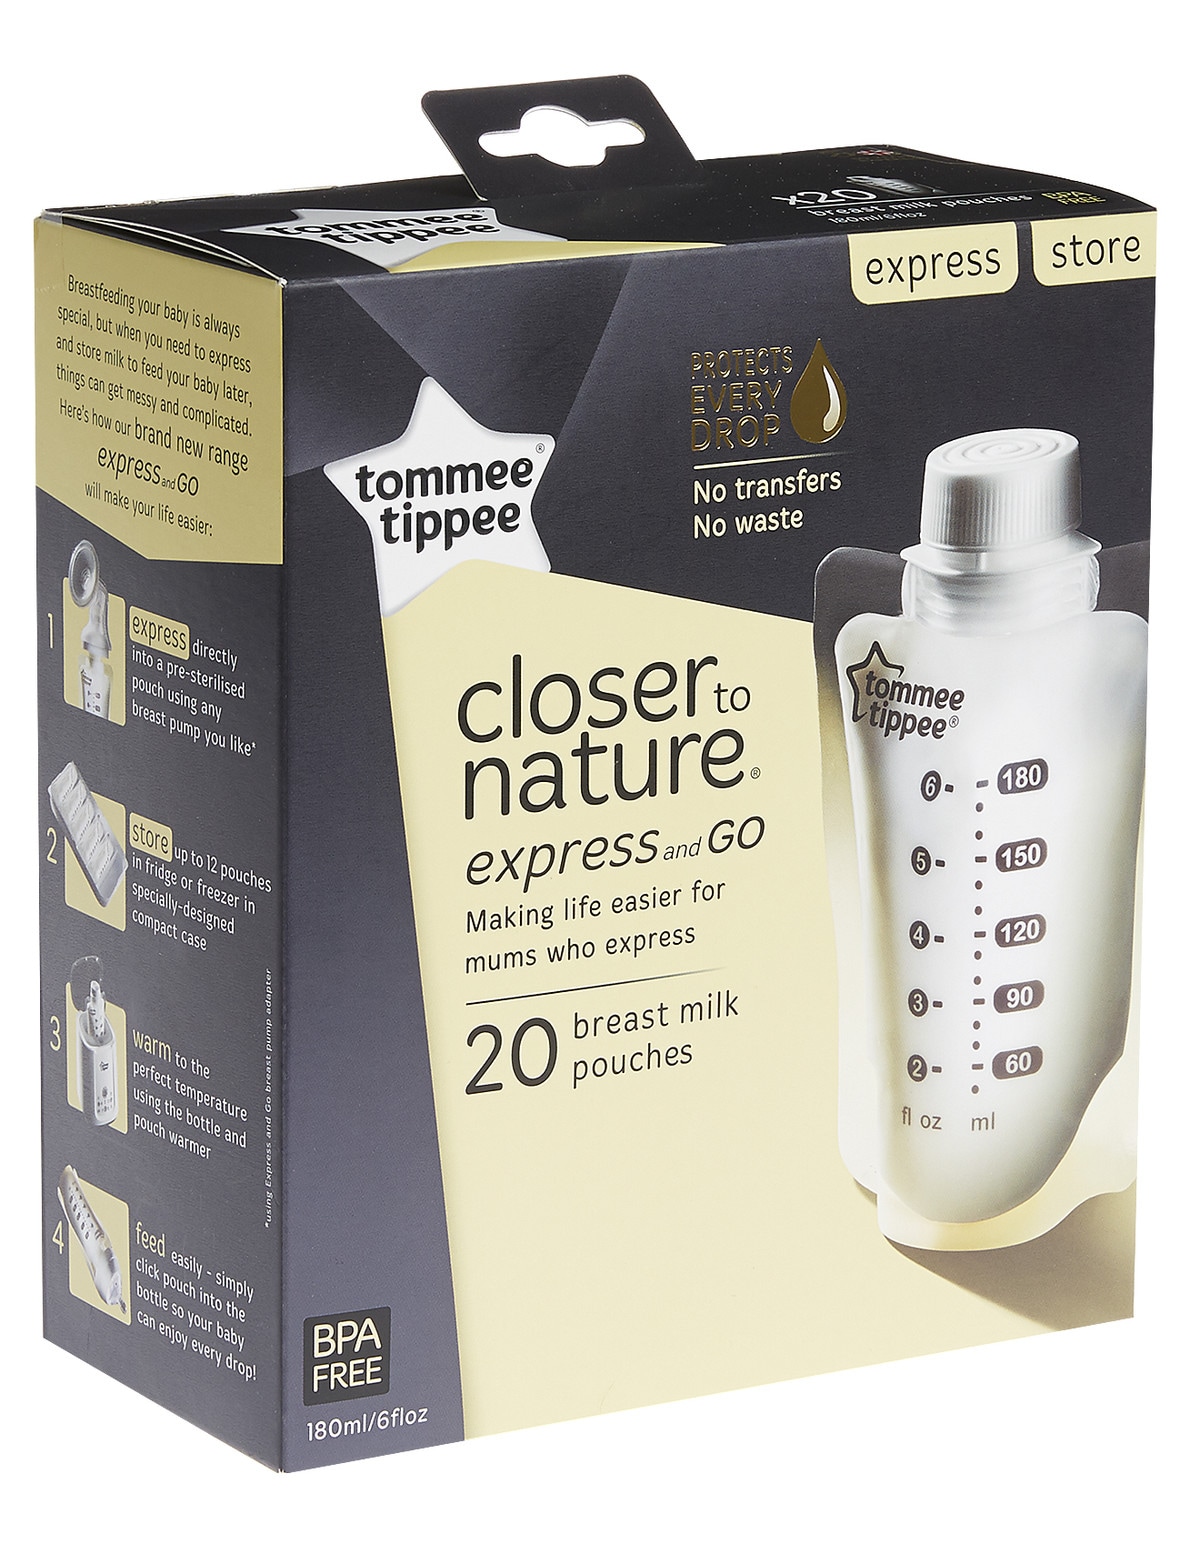 Tommee Tippee Pump and Go Breast Milk Storage Bags, For Storing